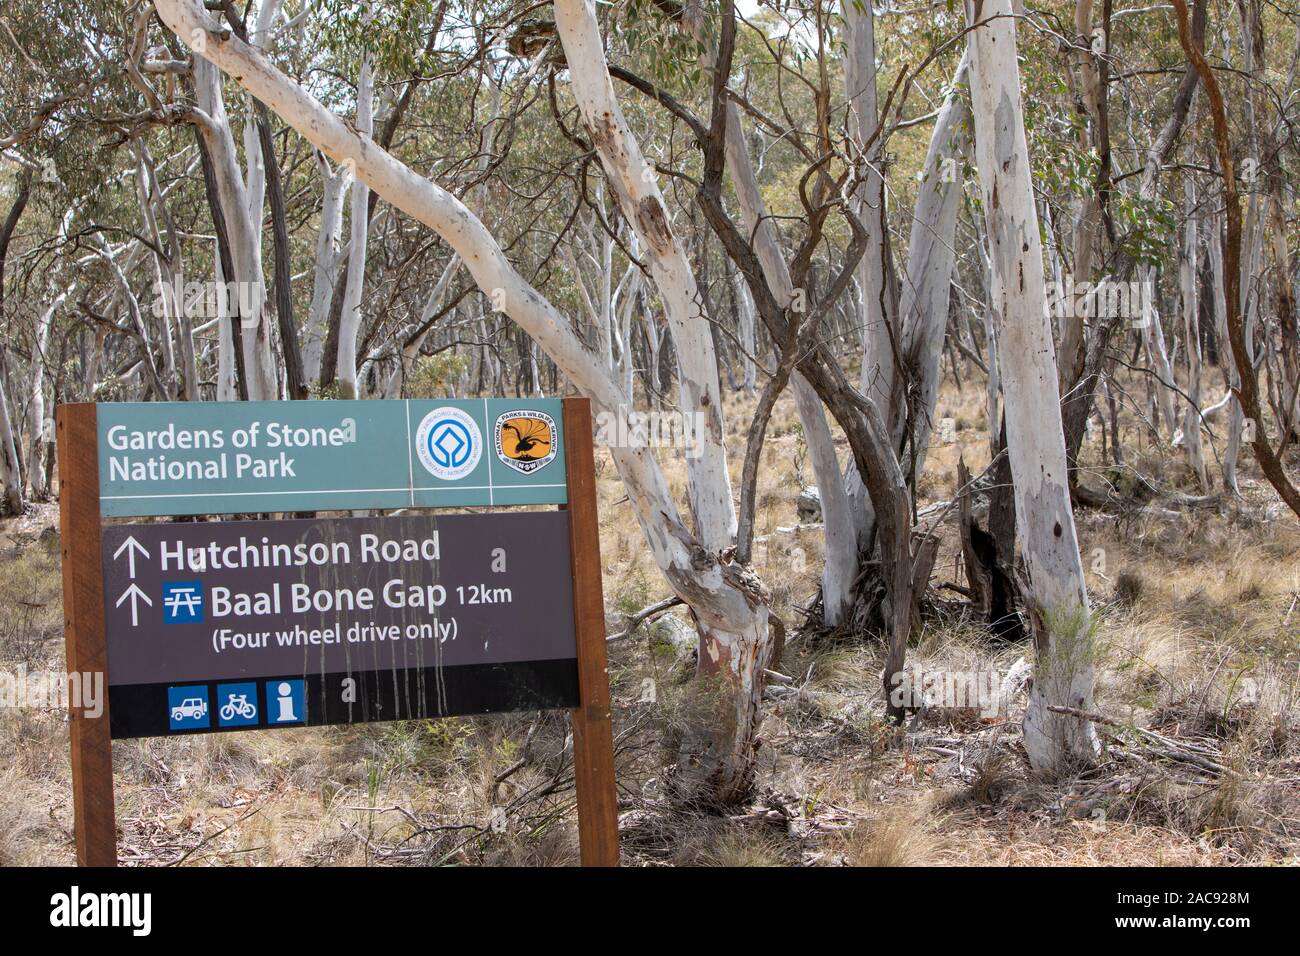 Gardens of stone national park and famous baal bone gap 4 wheel drive route, Capertee, New South Wales,Australia Stock Photo